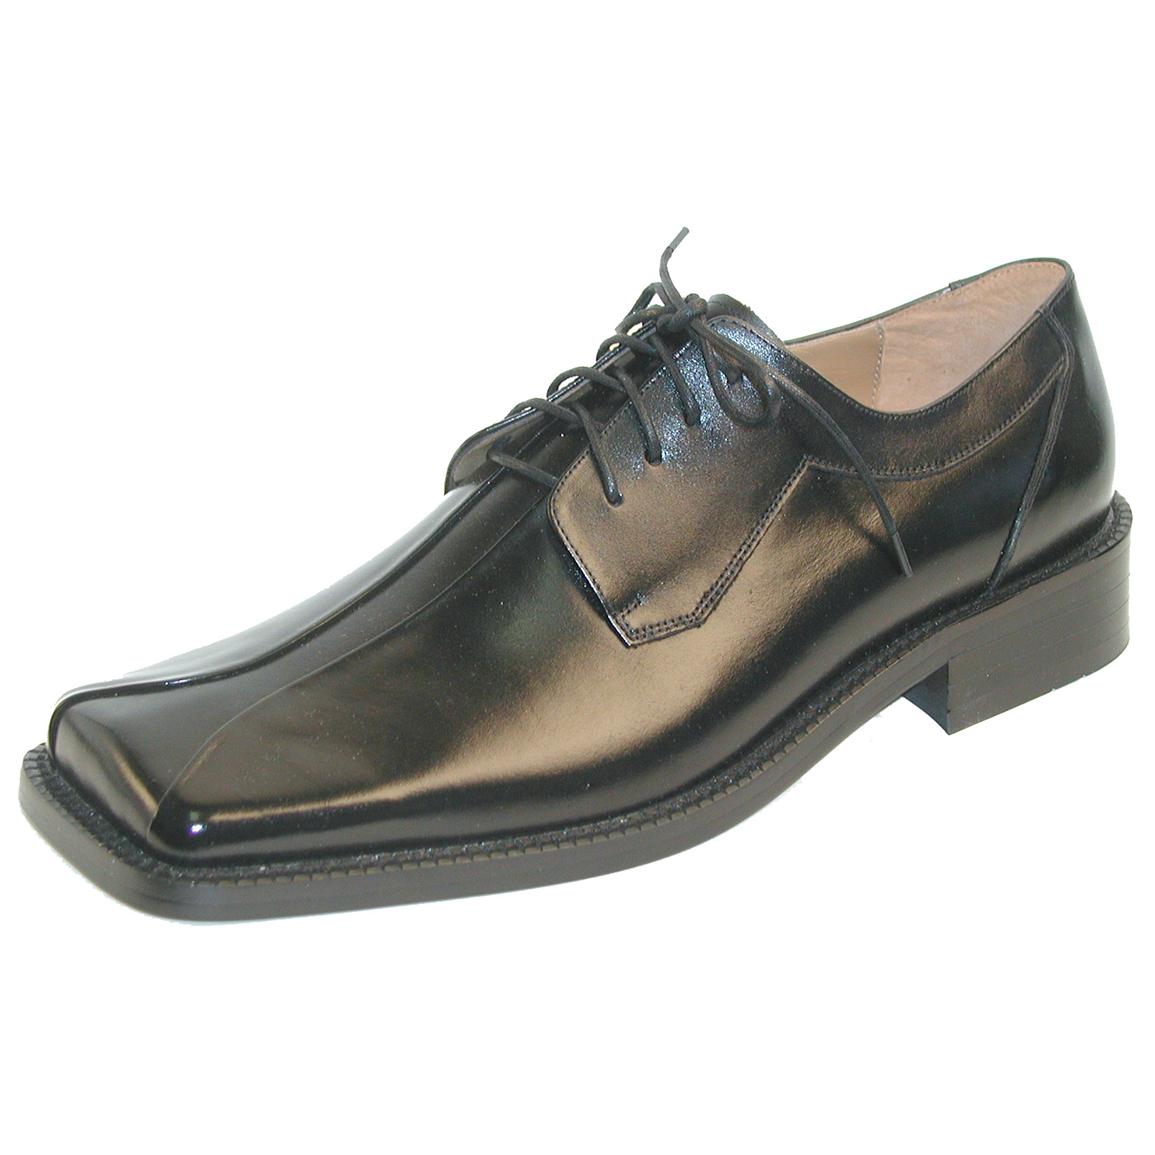 Men's Zengara® Oxfords - 102714, Casual Shoes at Sportsman's Guide